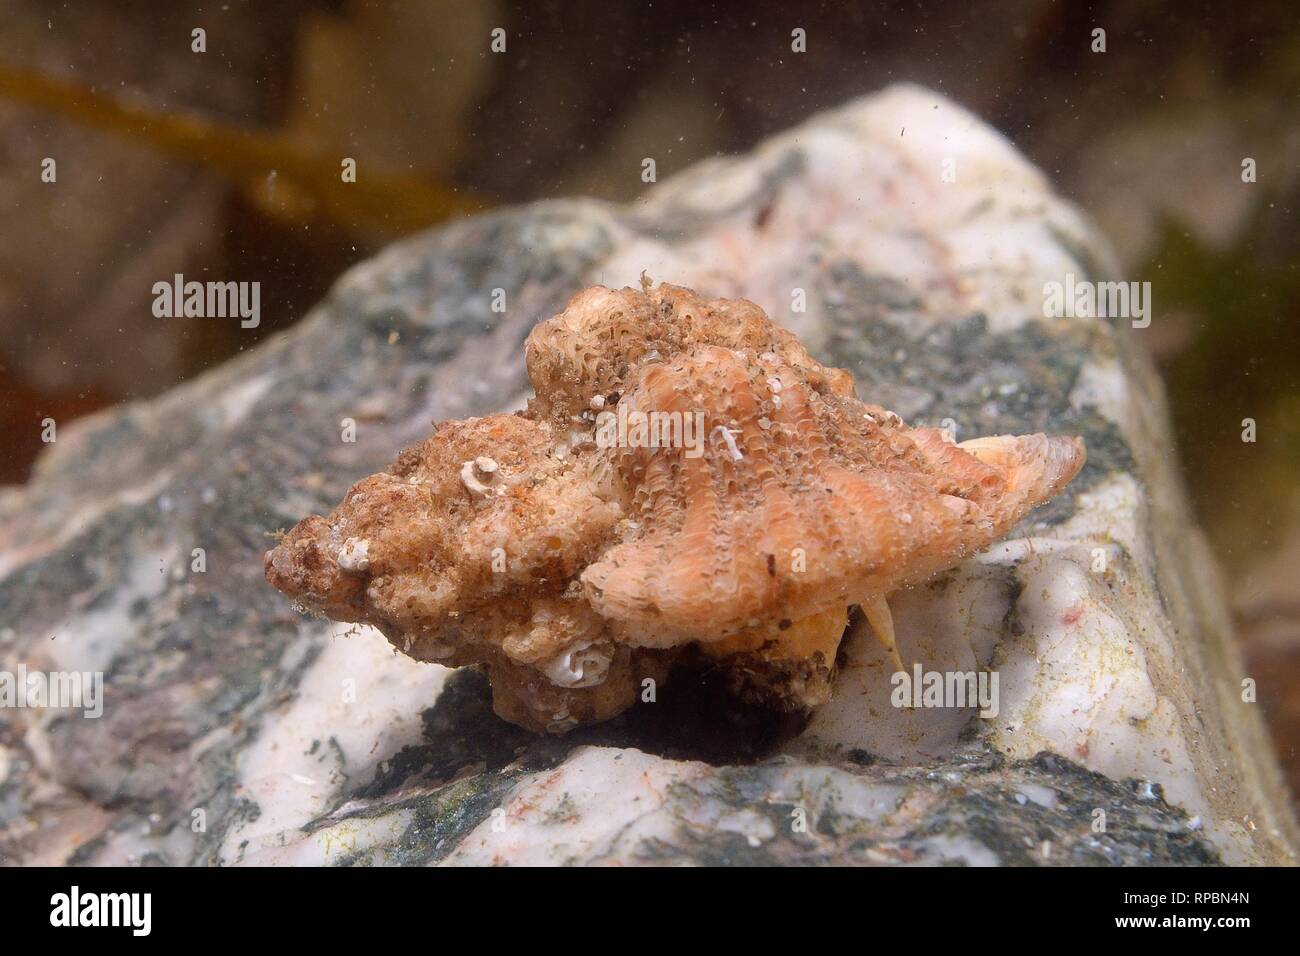 European oyster drill / Sting winkle (Ocenebra erinacea) a pest of oyster beds, on the move in a rock pool, South Devon, UK, September. Stock Photo